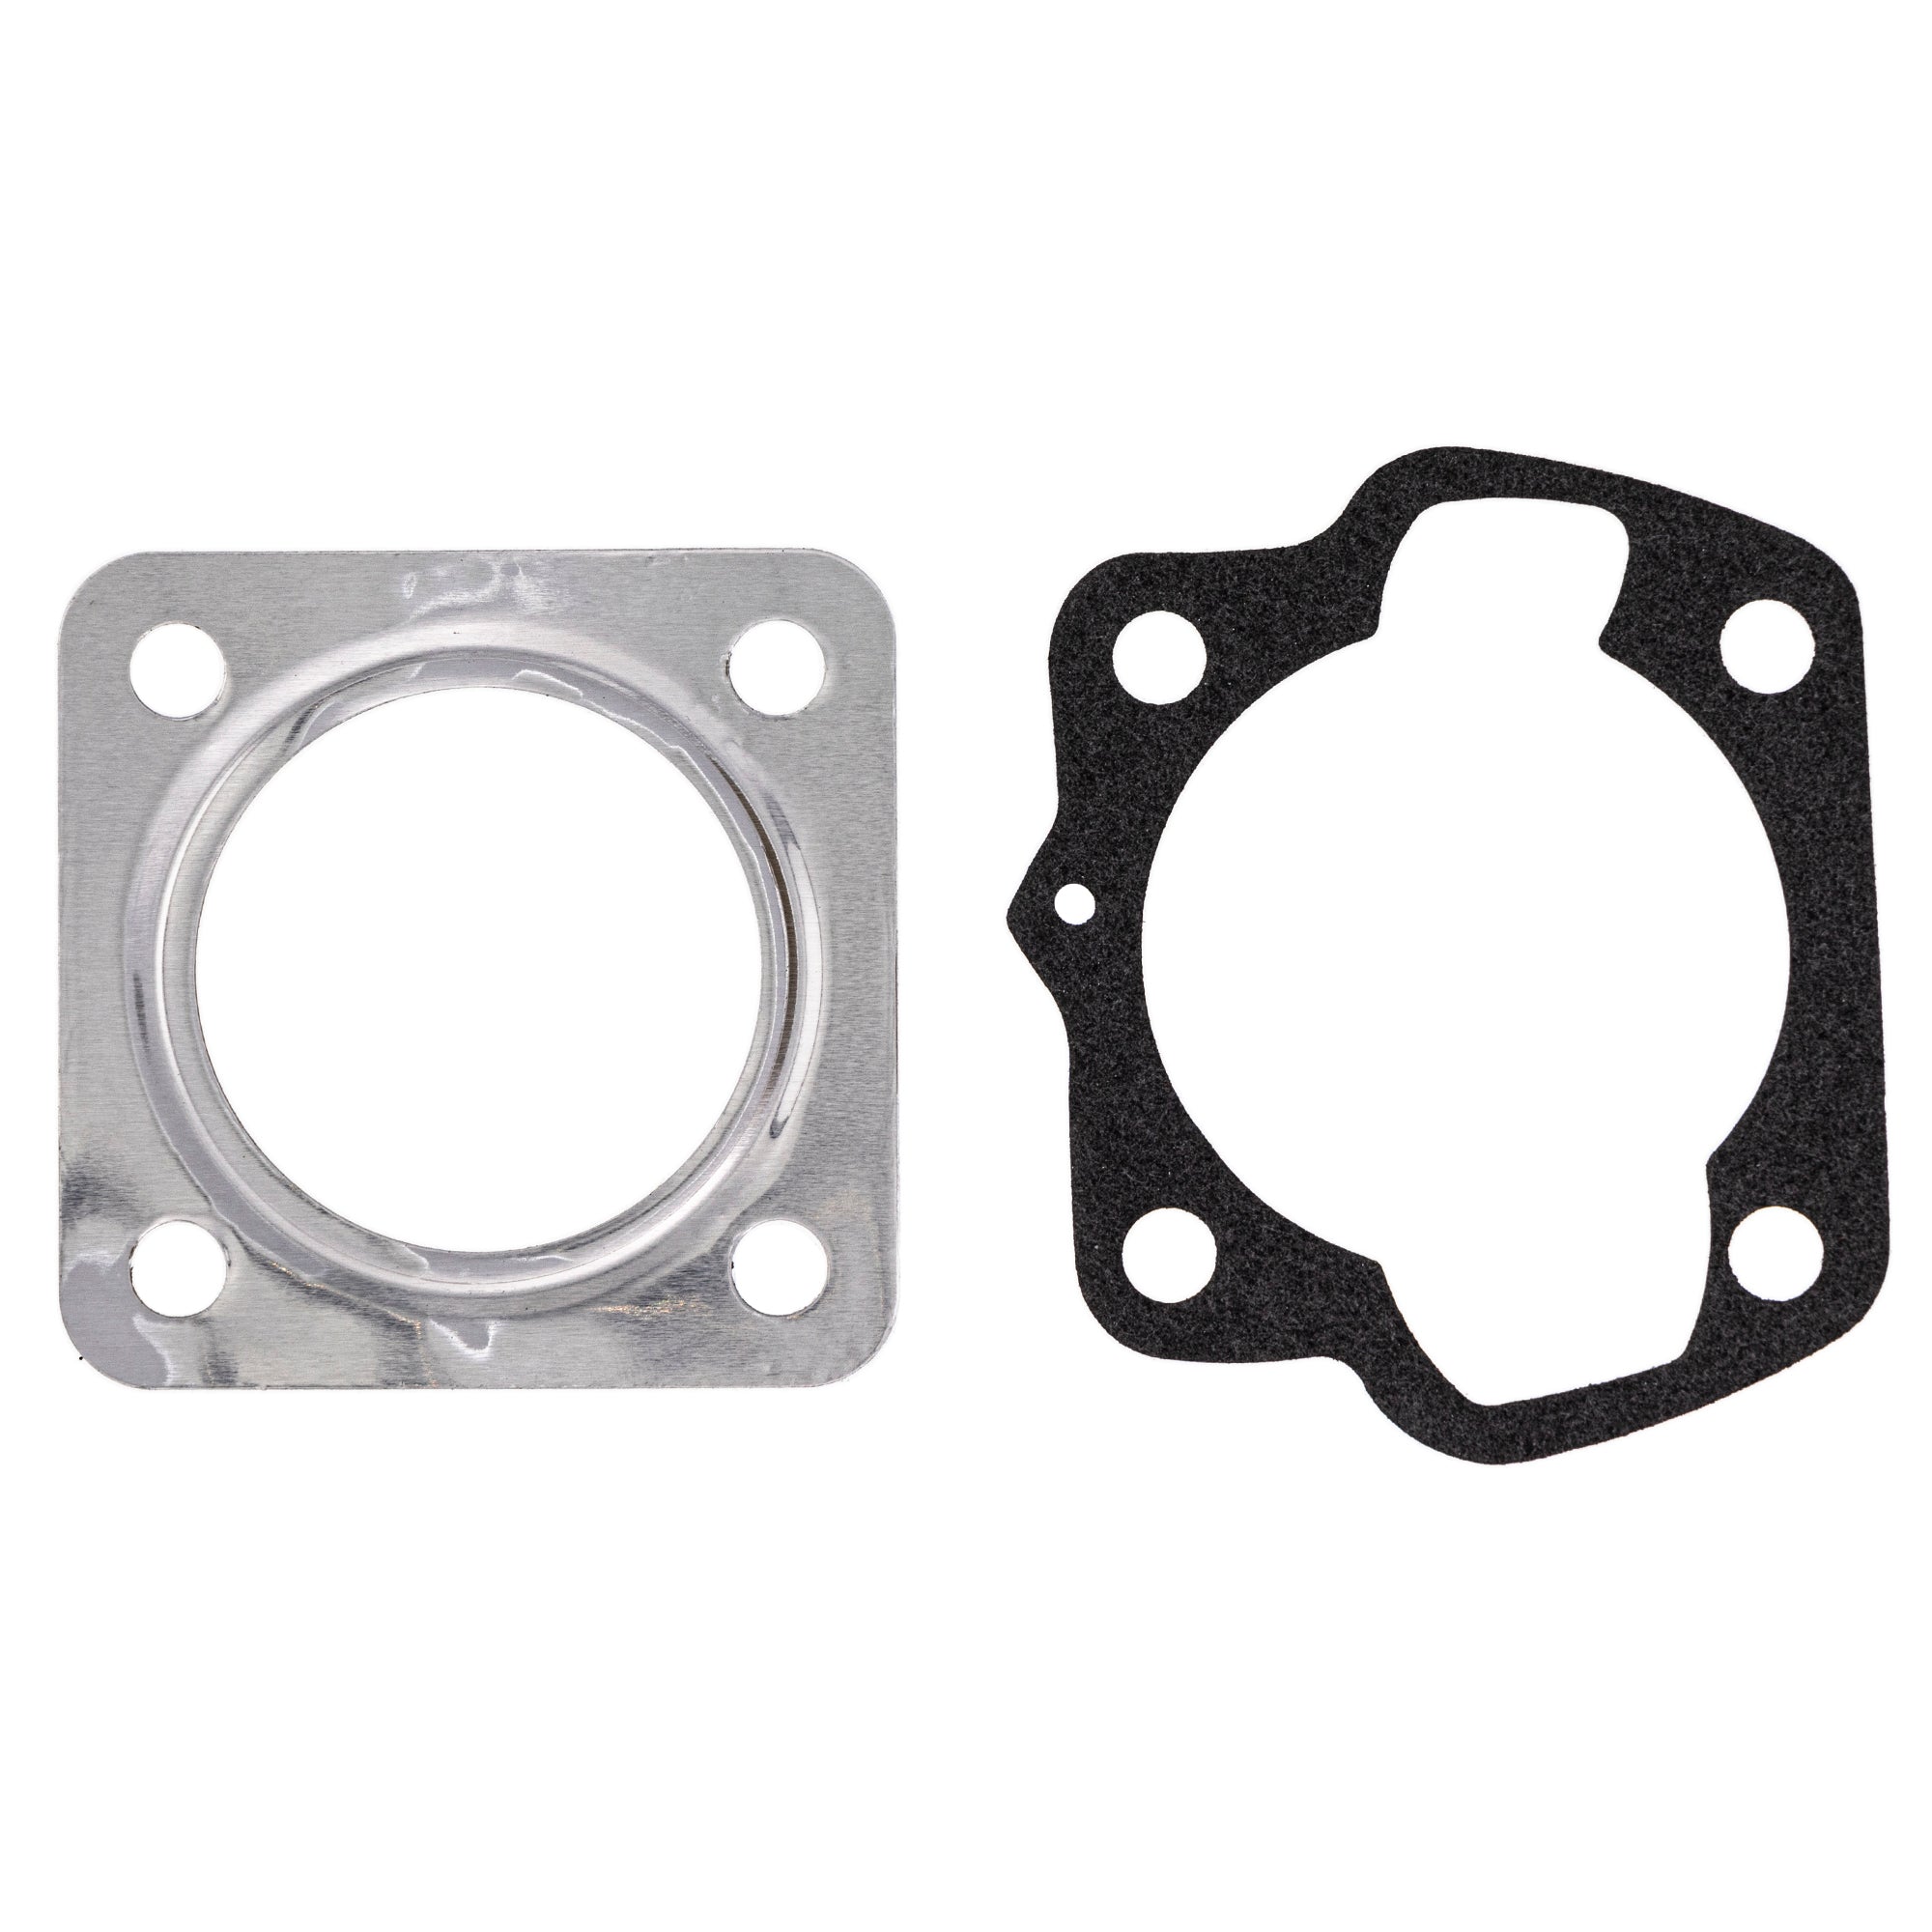 Wiseco Piston Gasket Cylinder Head Top End Kit for Kawasaki KDX50